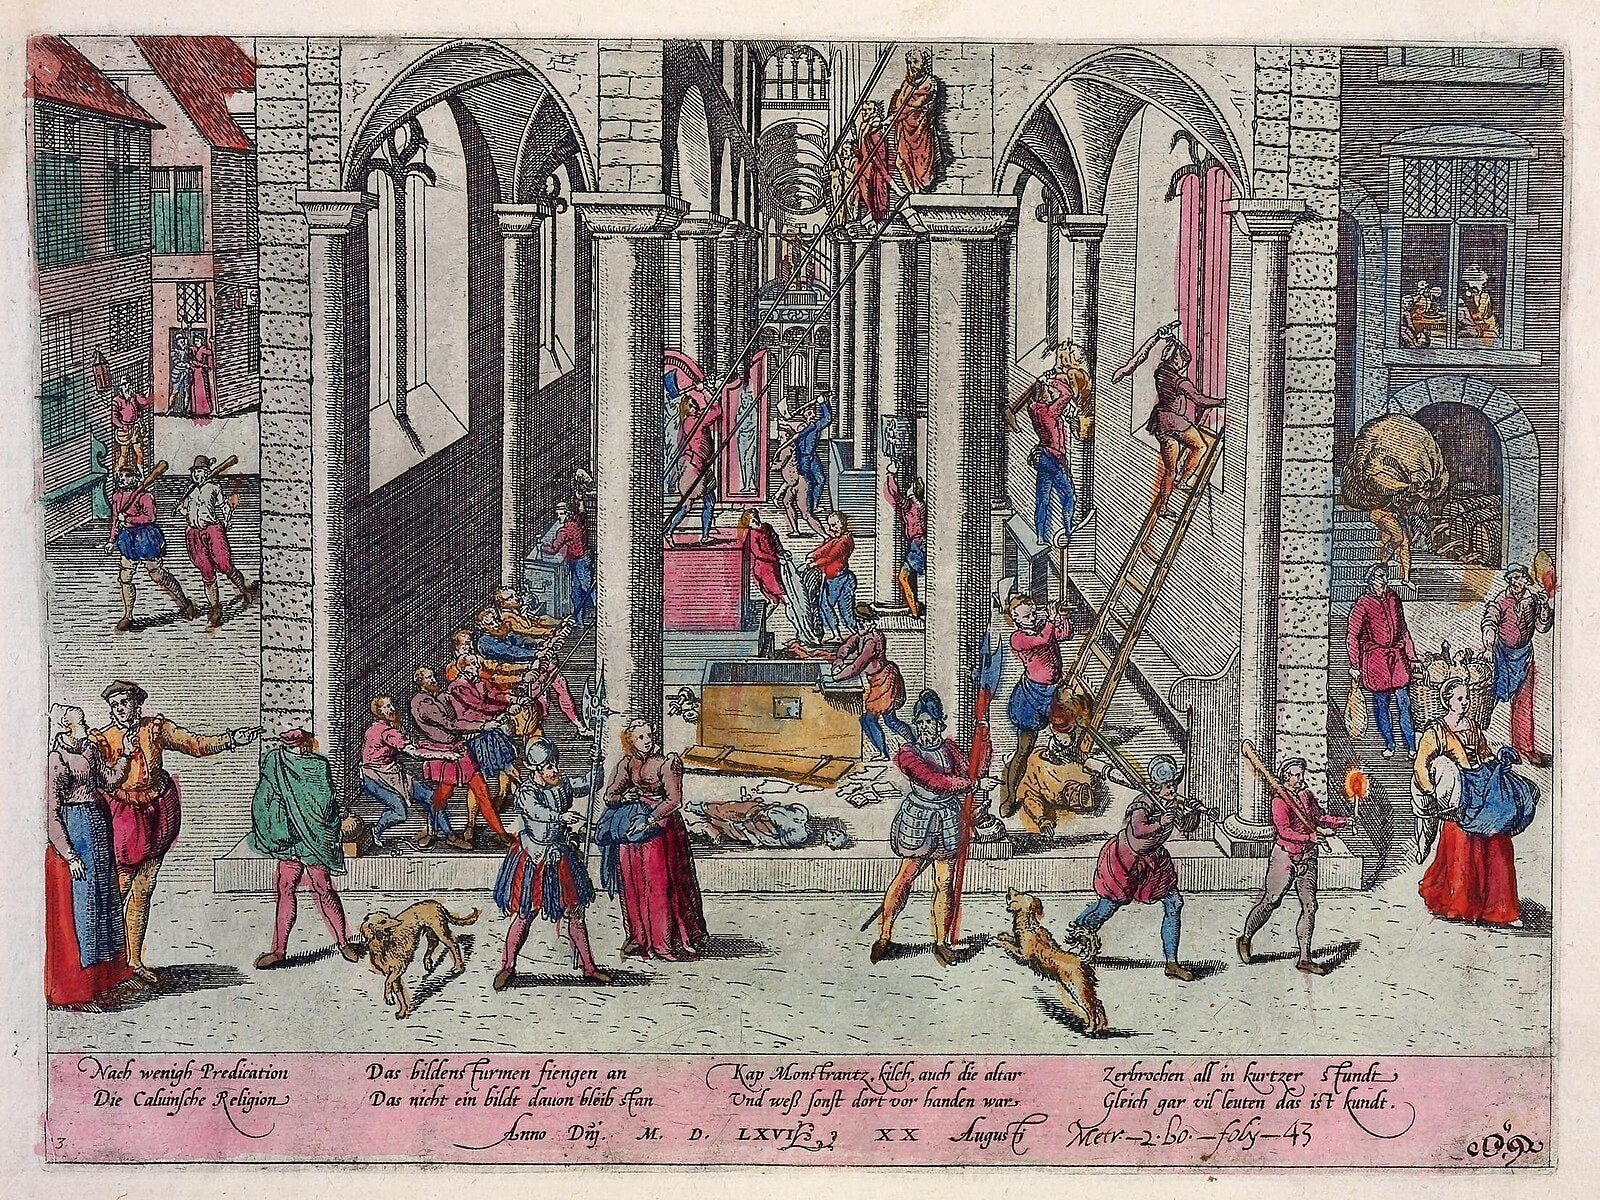 The ivory sculptures were removed from their ecclesiastical home during the Reformation. It was a phenomenon which took place throughout much of Europe. This image shows Protestants using ropes to bring down a series of sculptures in a church in Antwerp in the mid 16th century. But scenes in England would have been similar